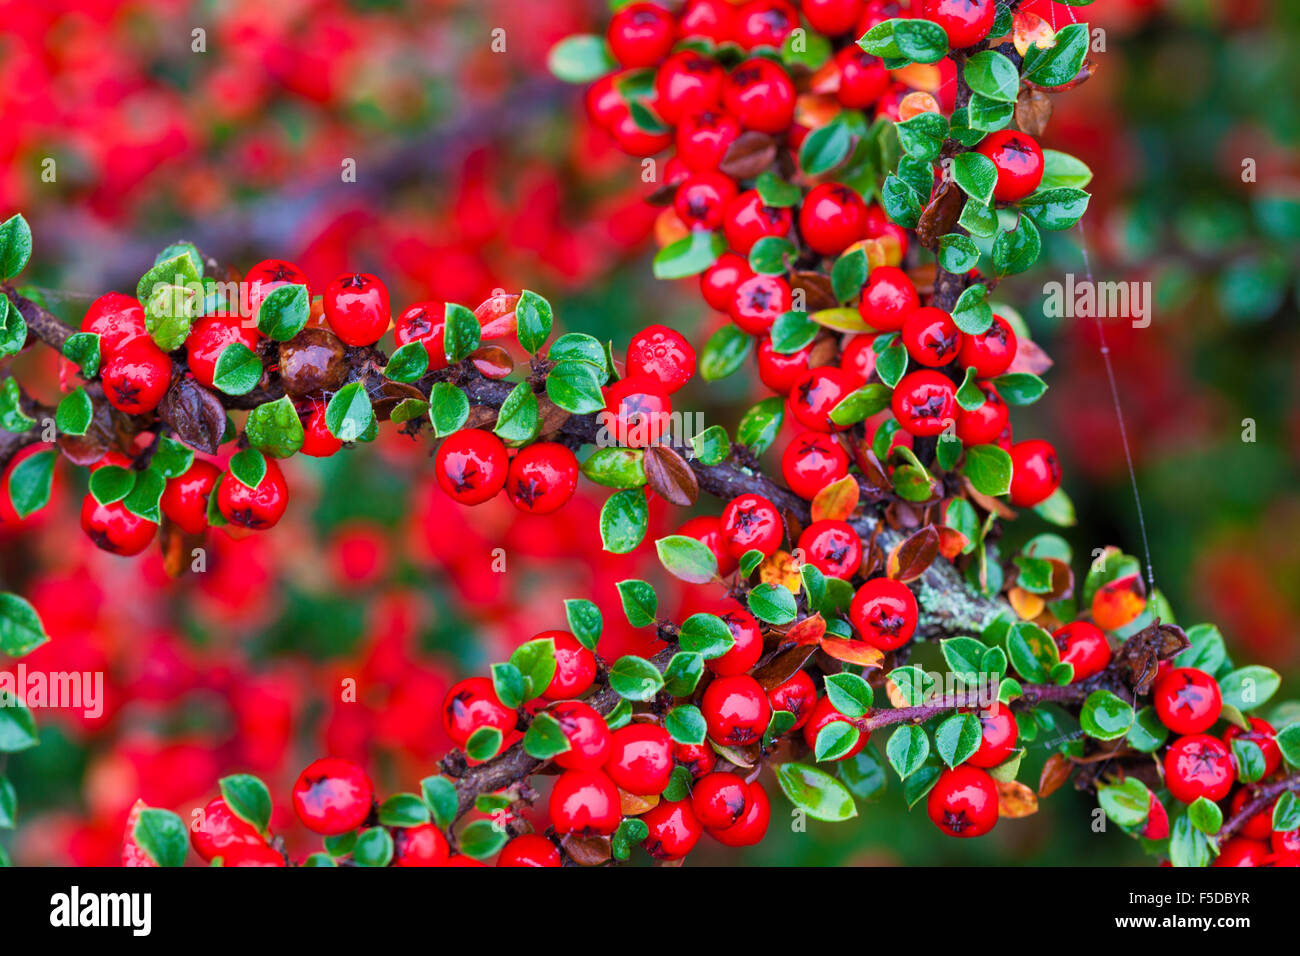 Pyracantha covered in red berries on a damp autumn morning, London, UK Stock Photo